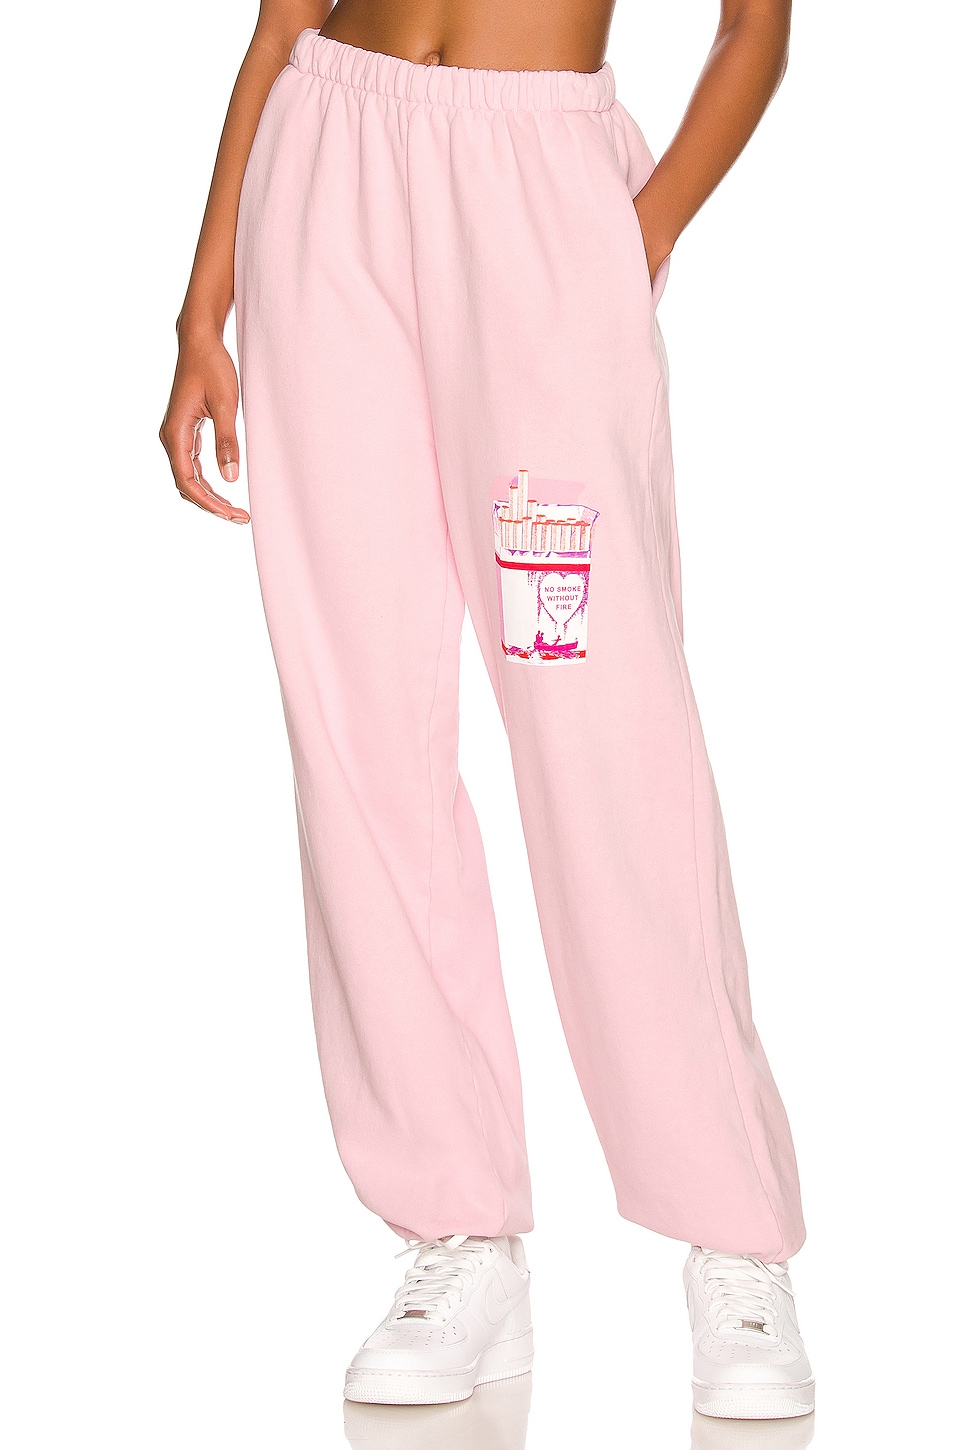 No Smoke Without Fire Sweatpants in Baby Pink